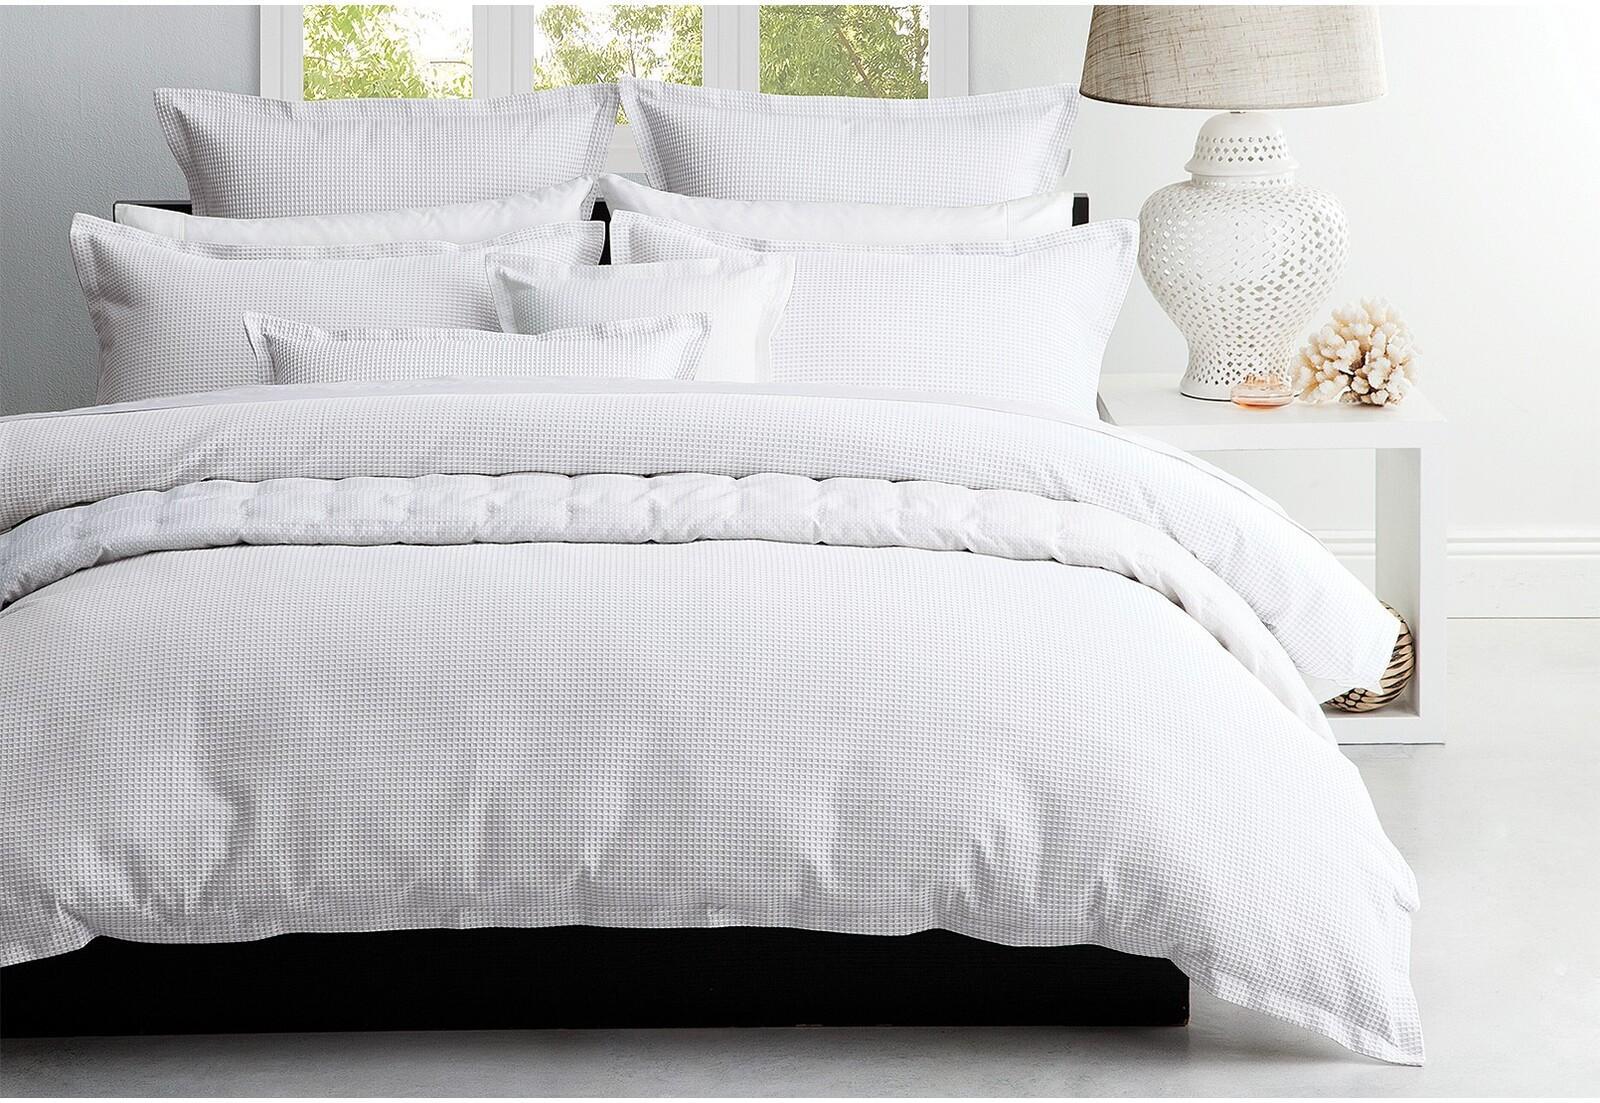 White Waffle Quilt Cover Set - Double